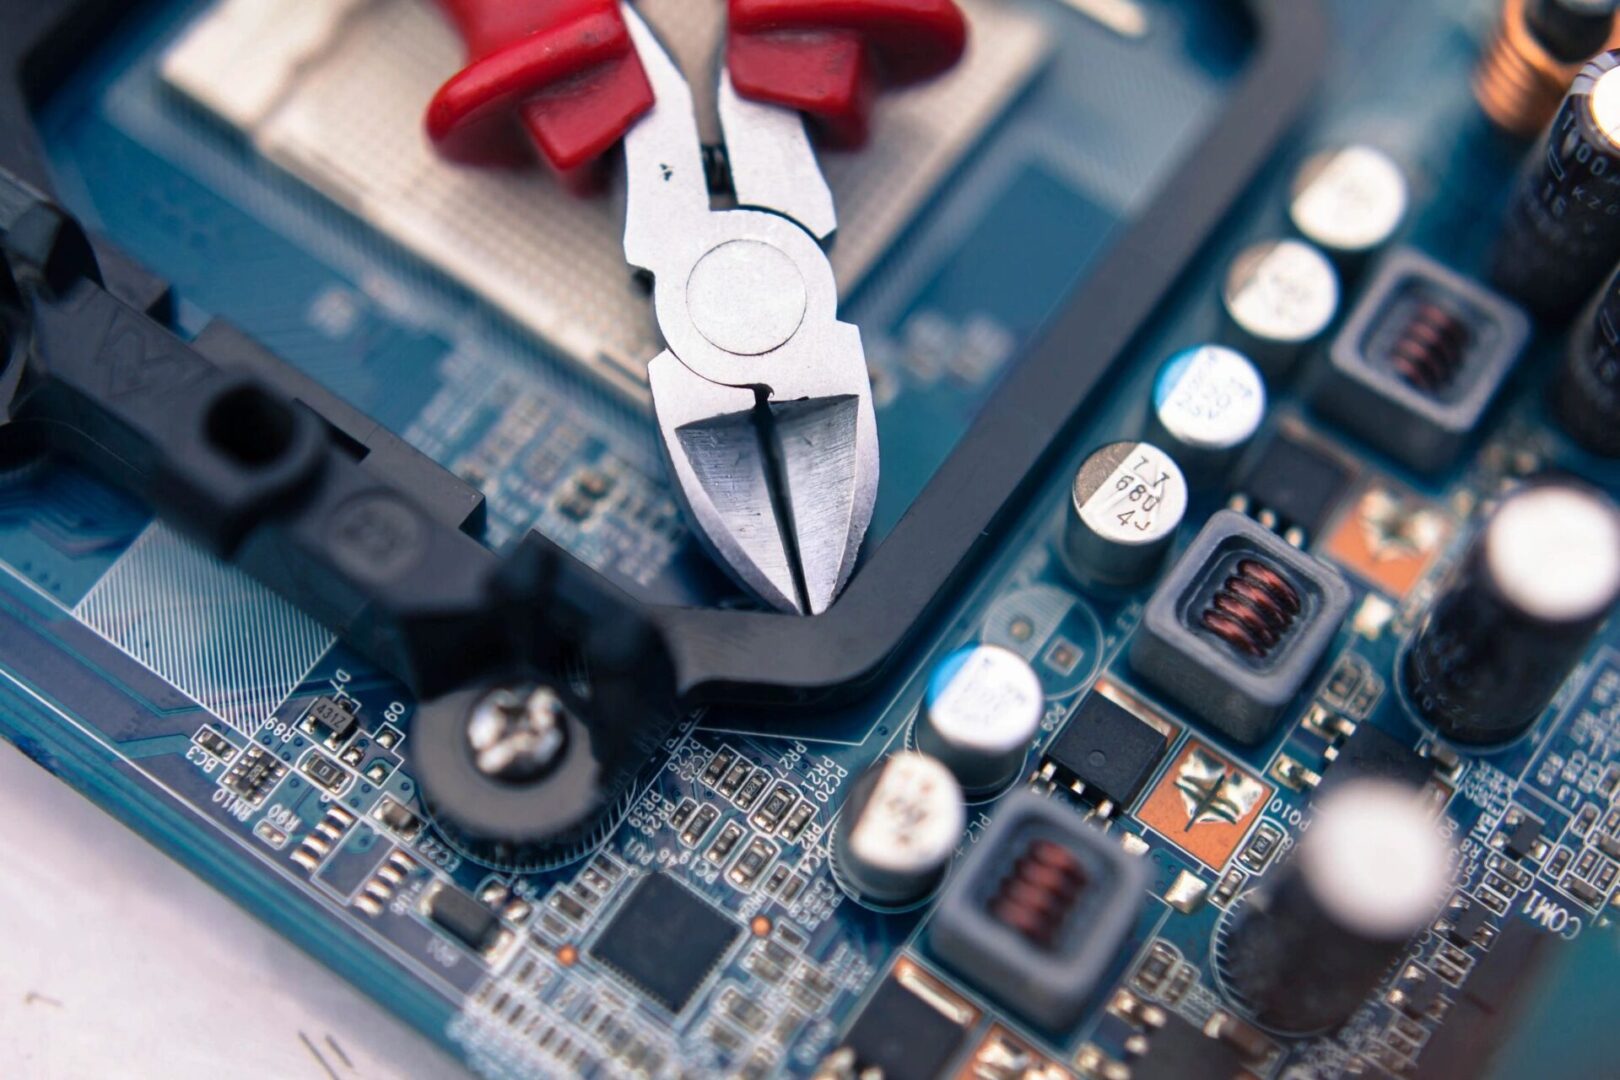 A pair of pliers sitting on top of a circuit board.